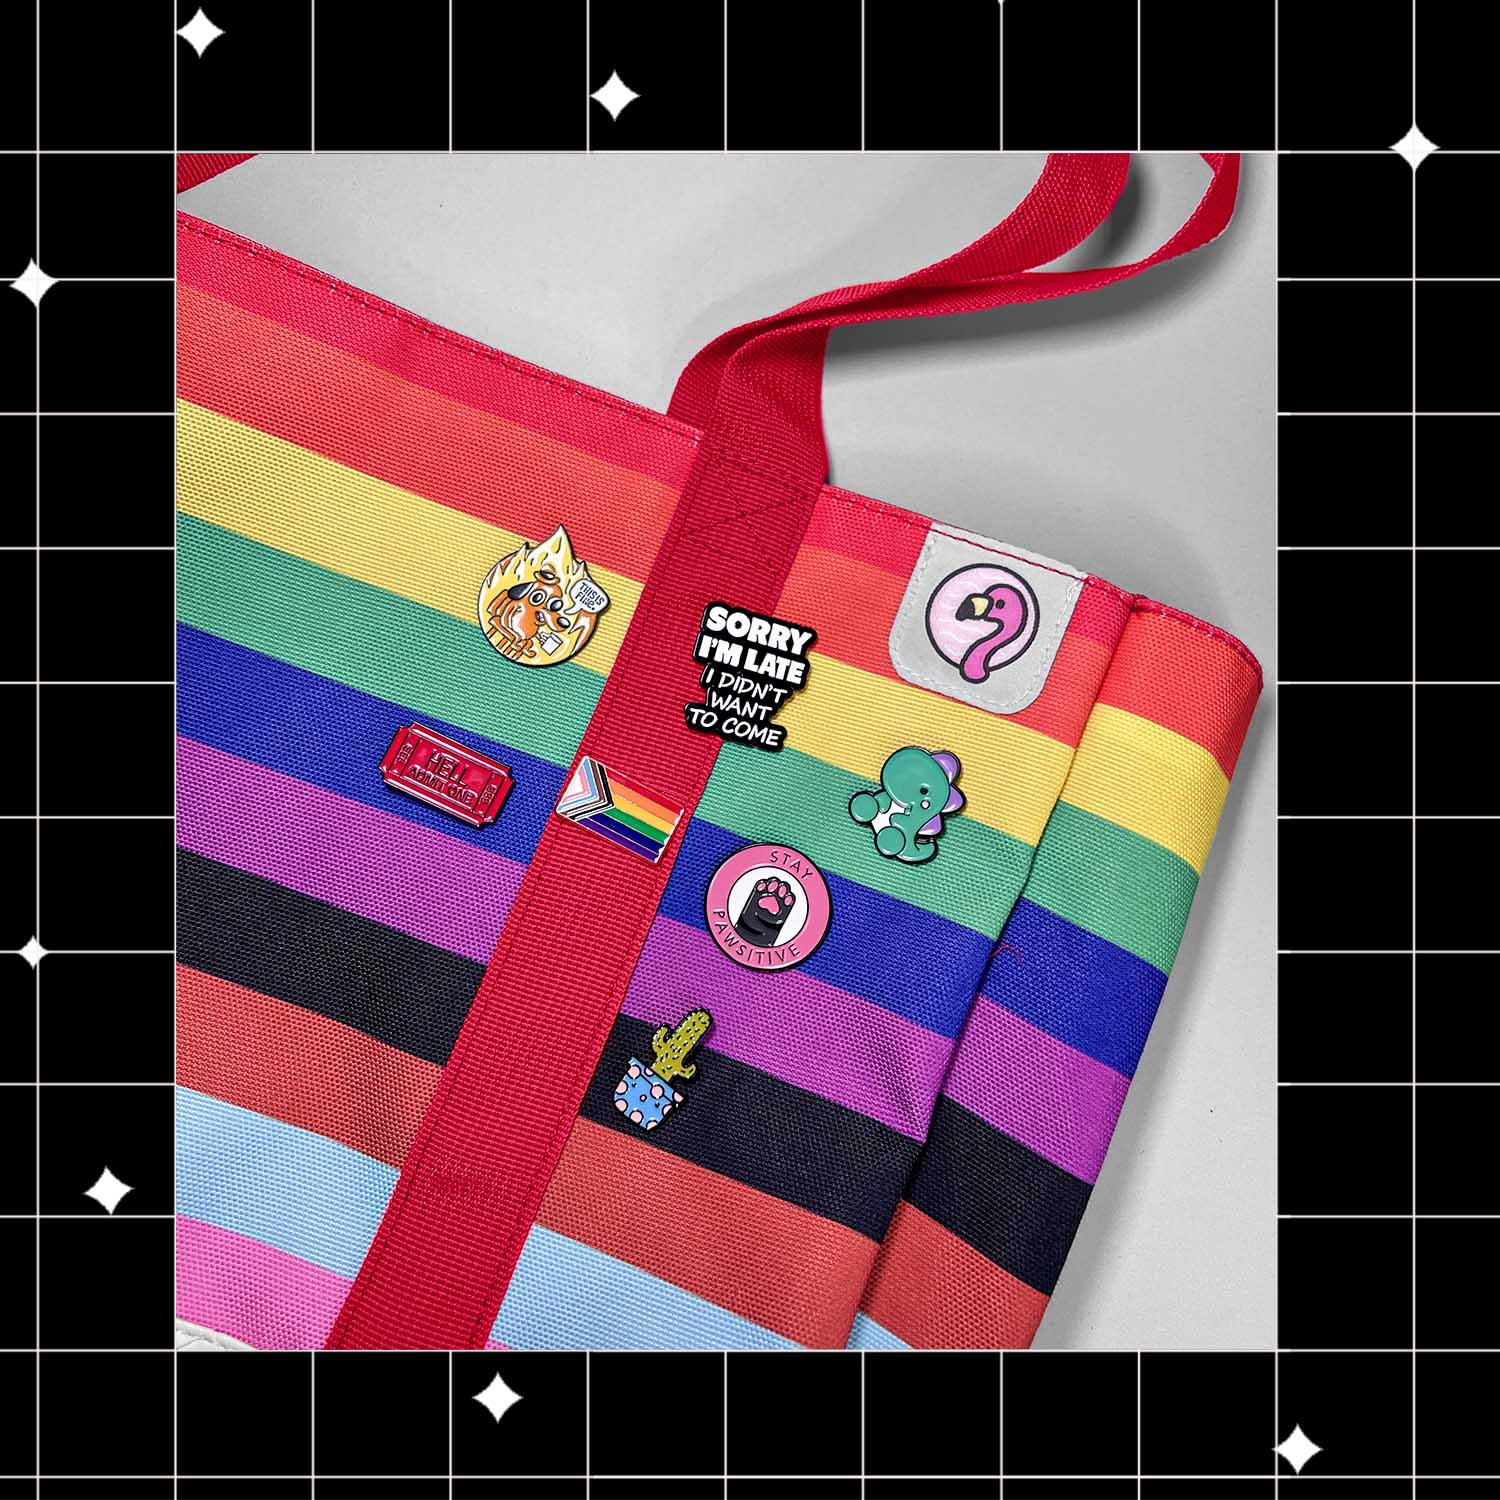 My rainbow bag from flying tiger has messed up colours so is not a